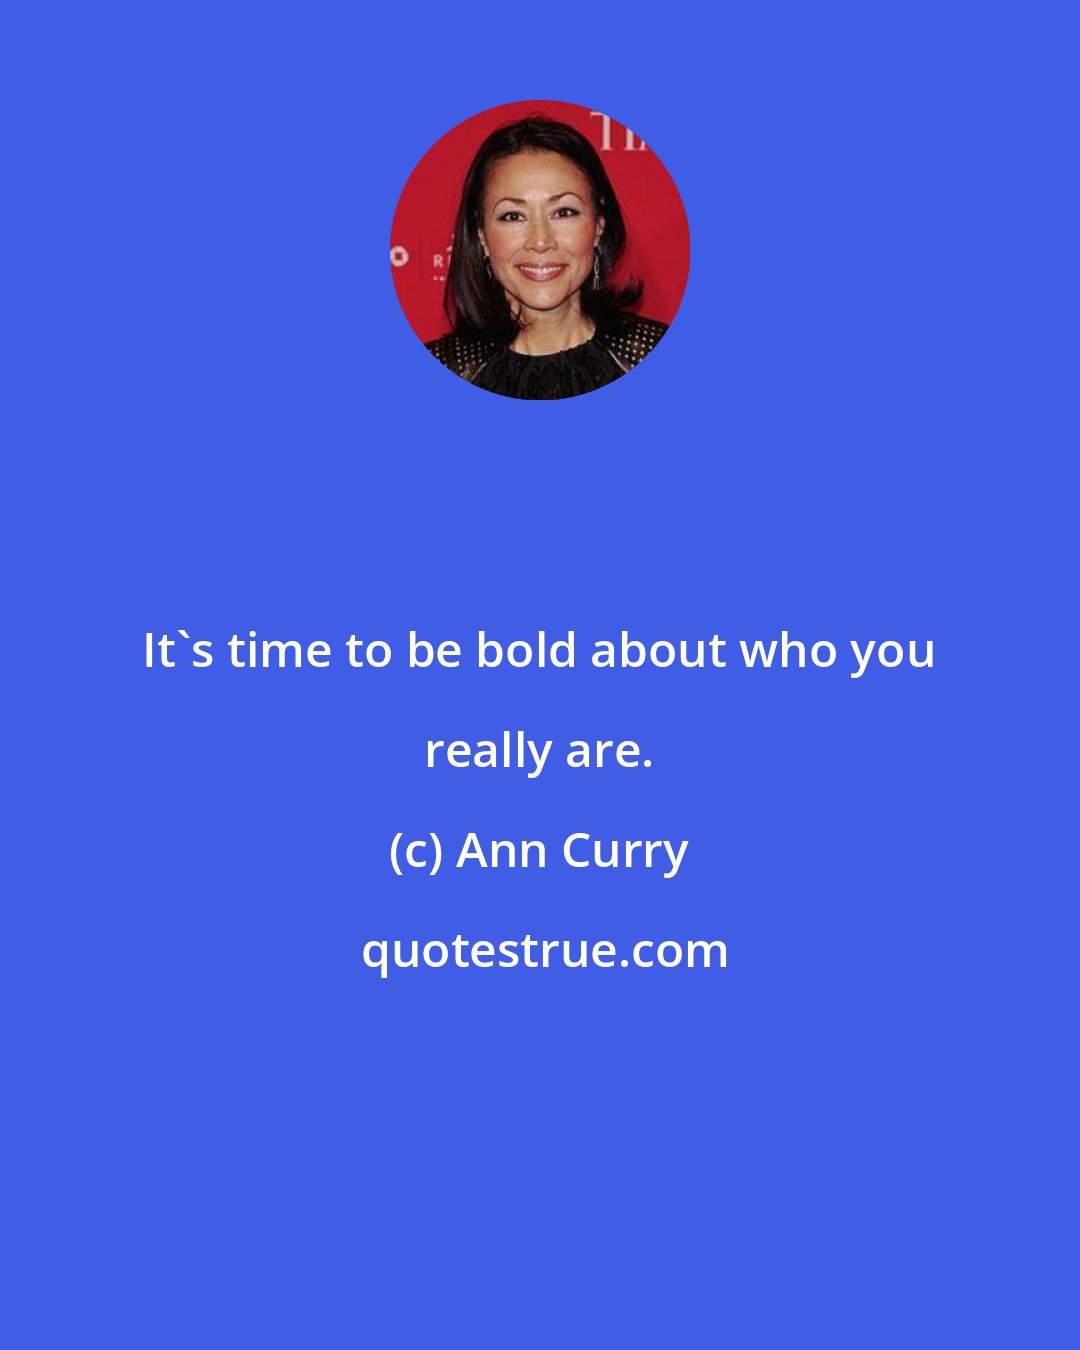 Ann Curry: It's time to be bold about who you really are.